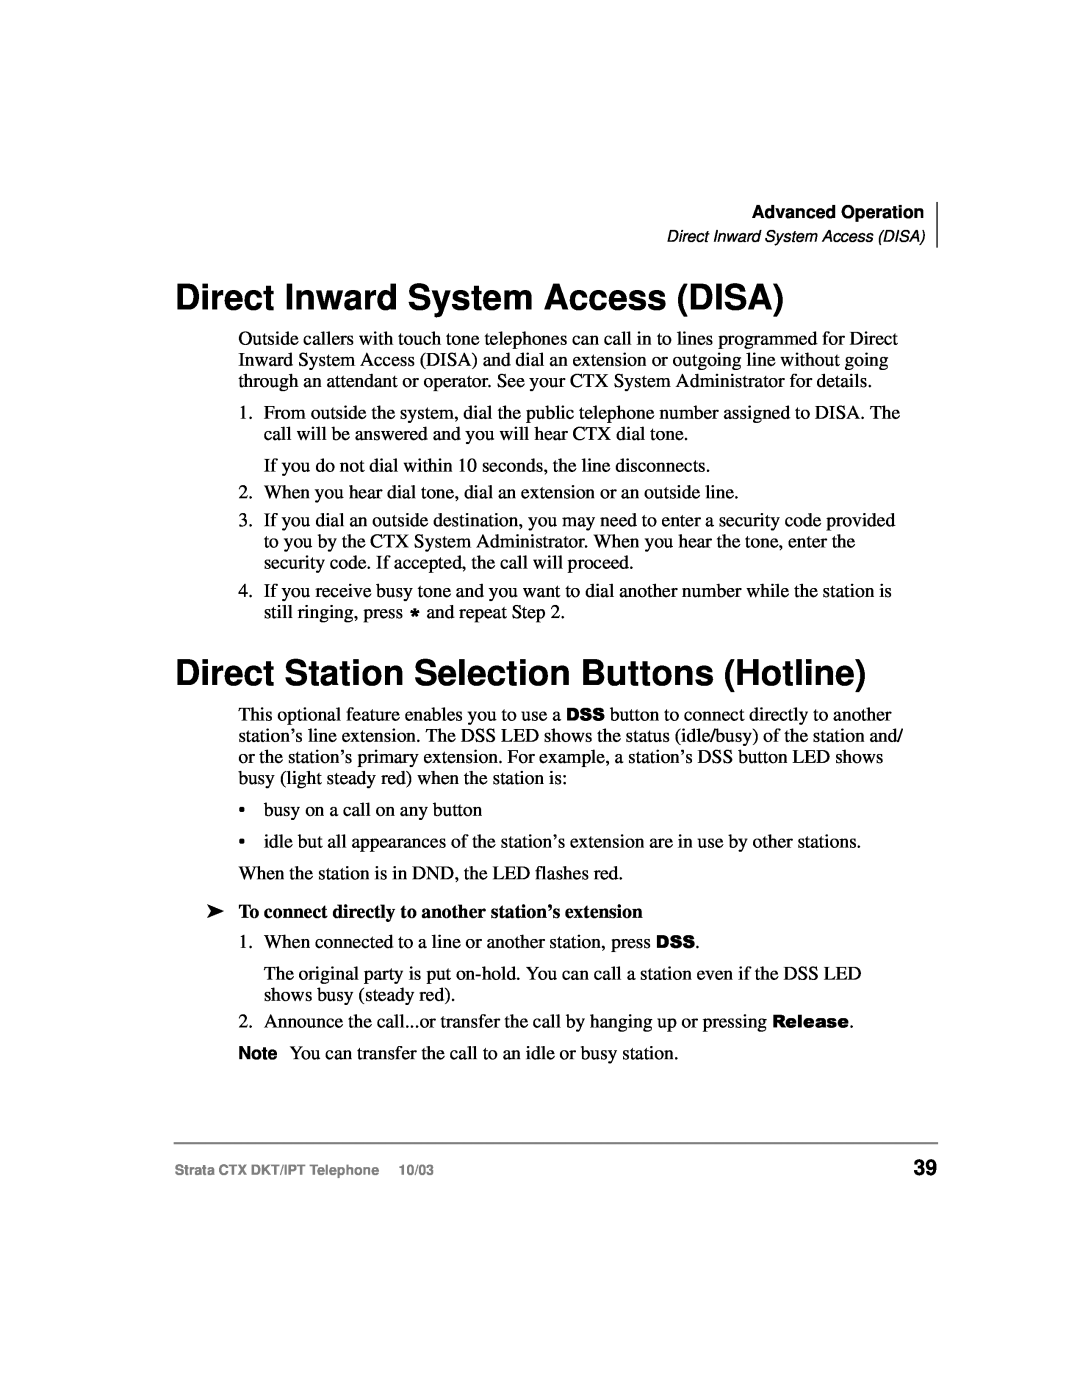 Toshiba DKT, IPT manual Direct Inward System Access DISA, Direct Station Selection Buttons Hotline 